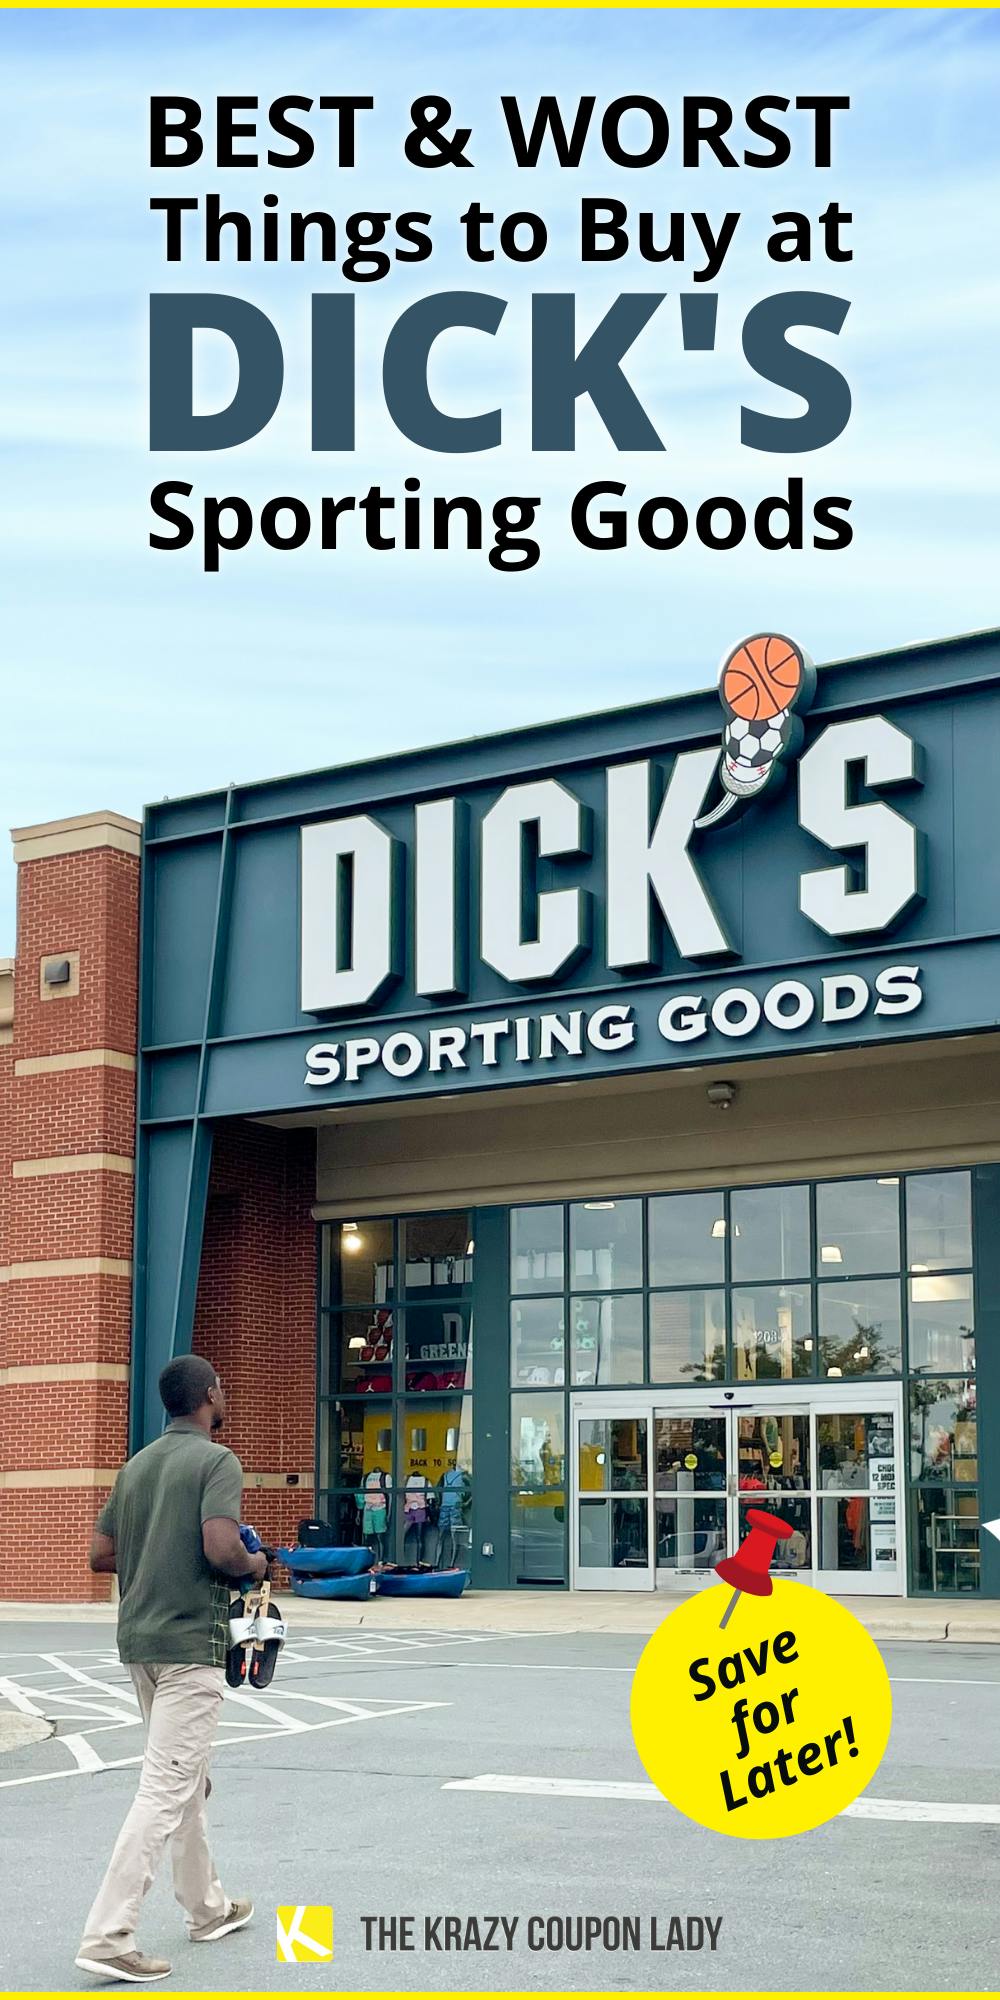 15 of the Best and Worst Things to Buy at Dick's Sporting Goods